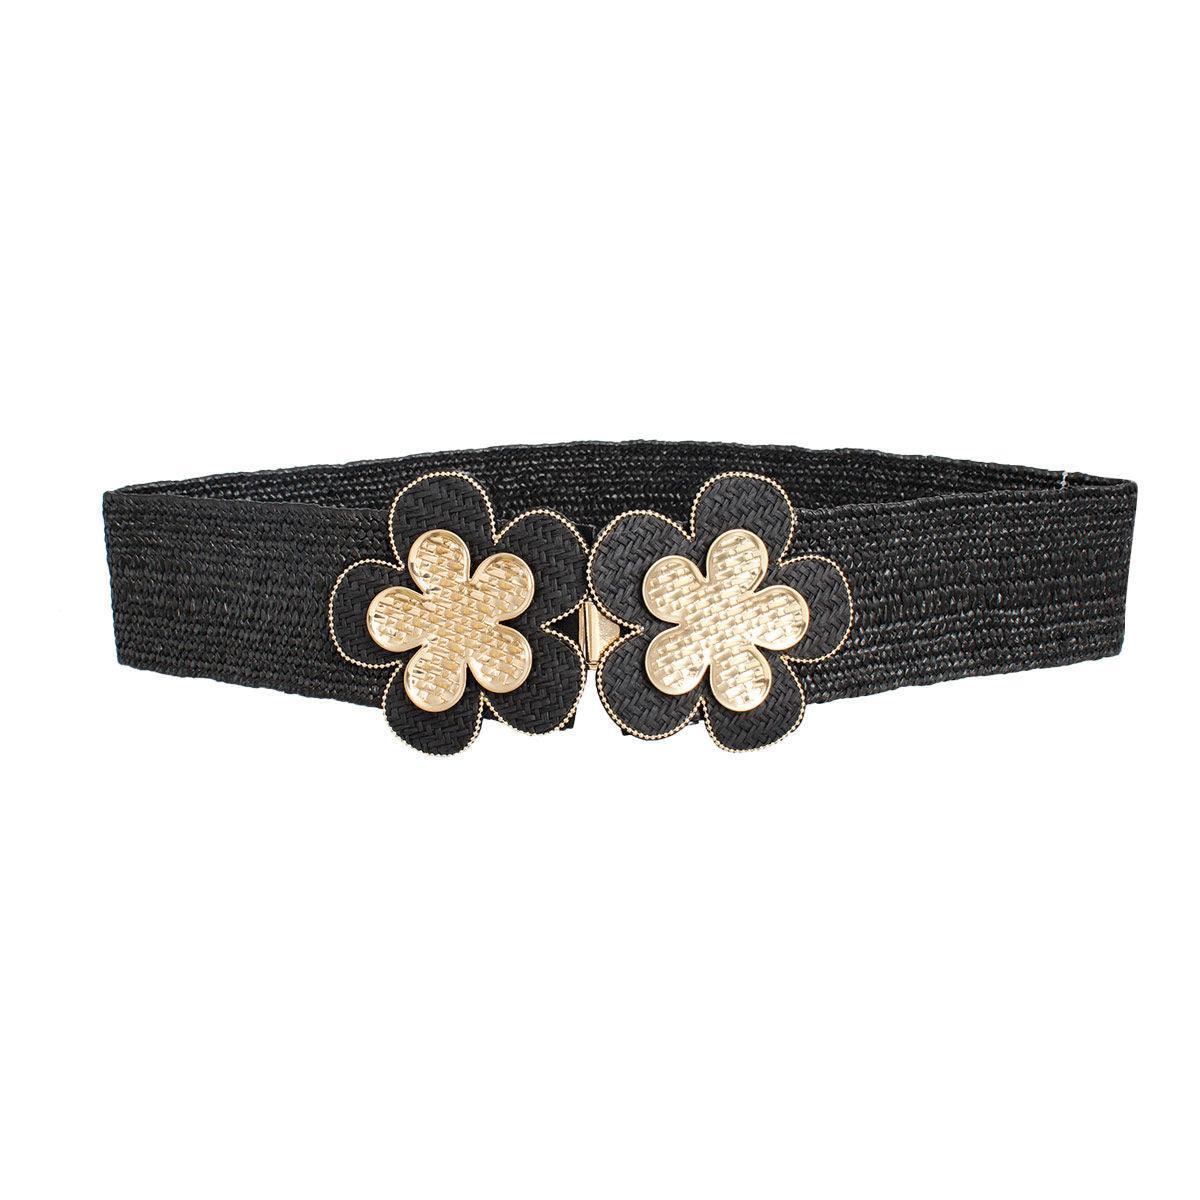 Raffia Belt with Gold Flower Buckle and Textured Detailing for Women